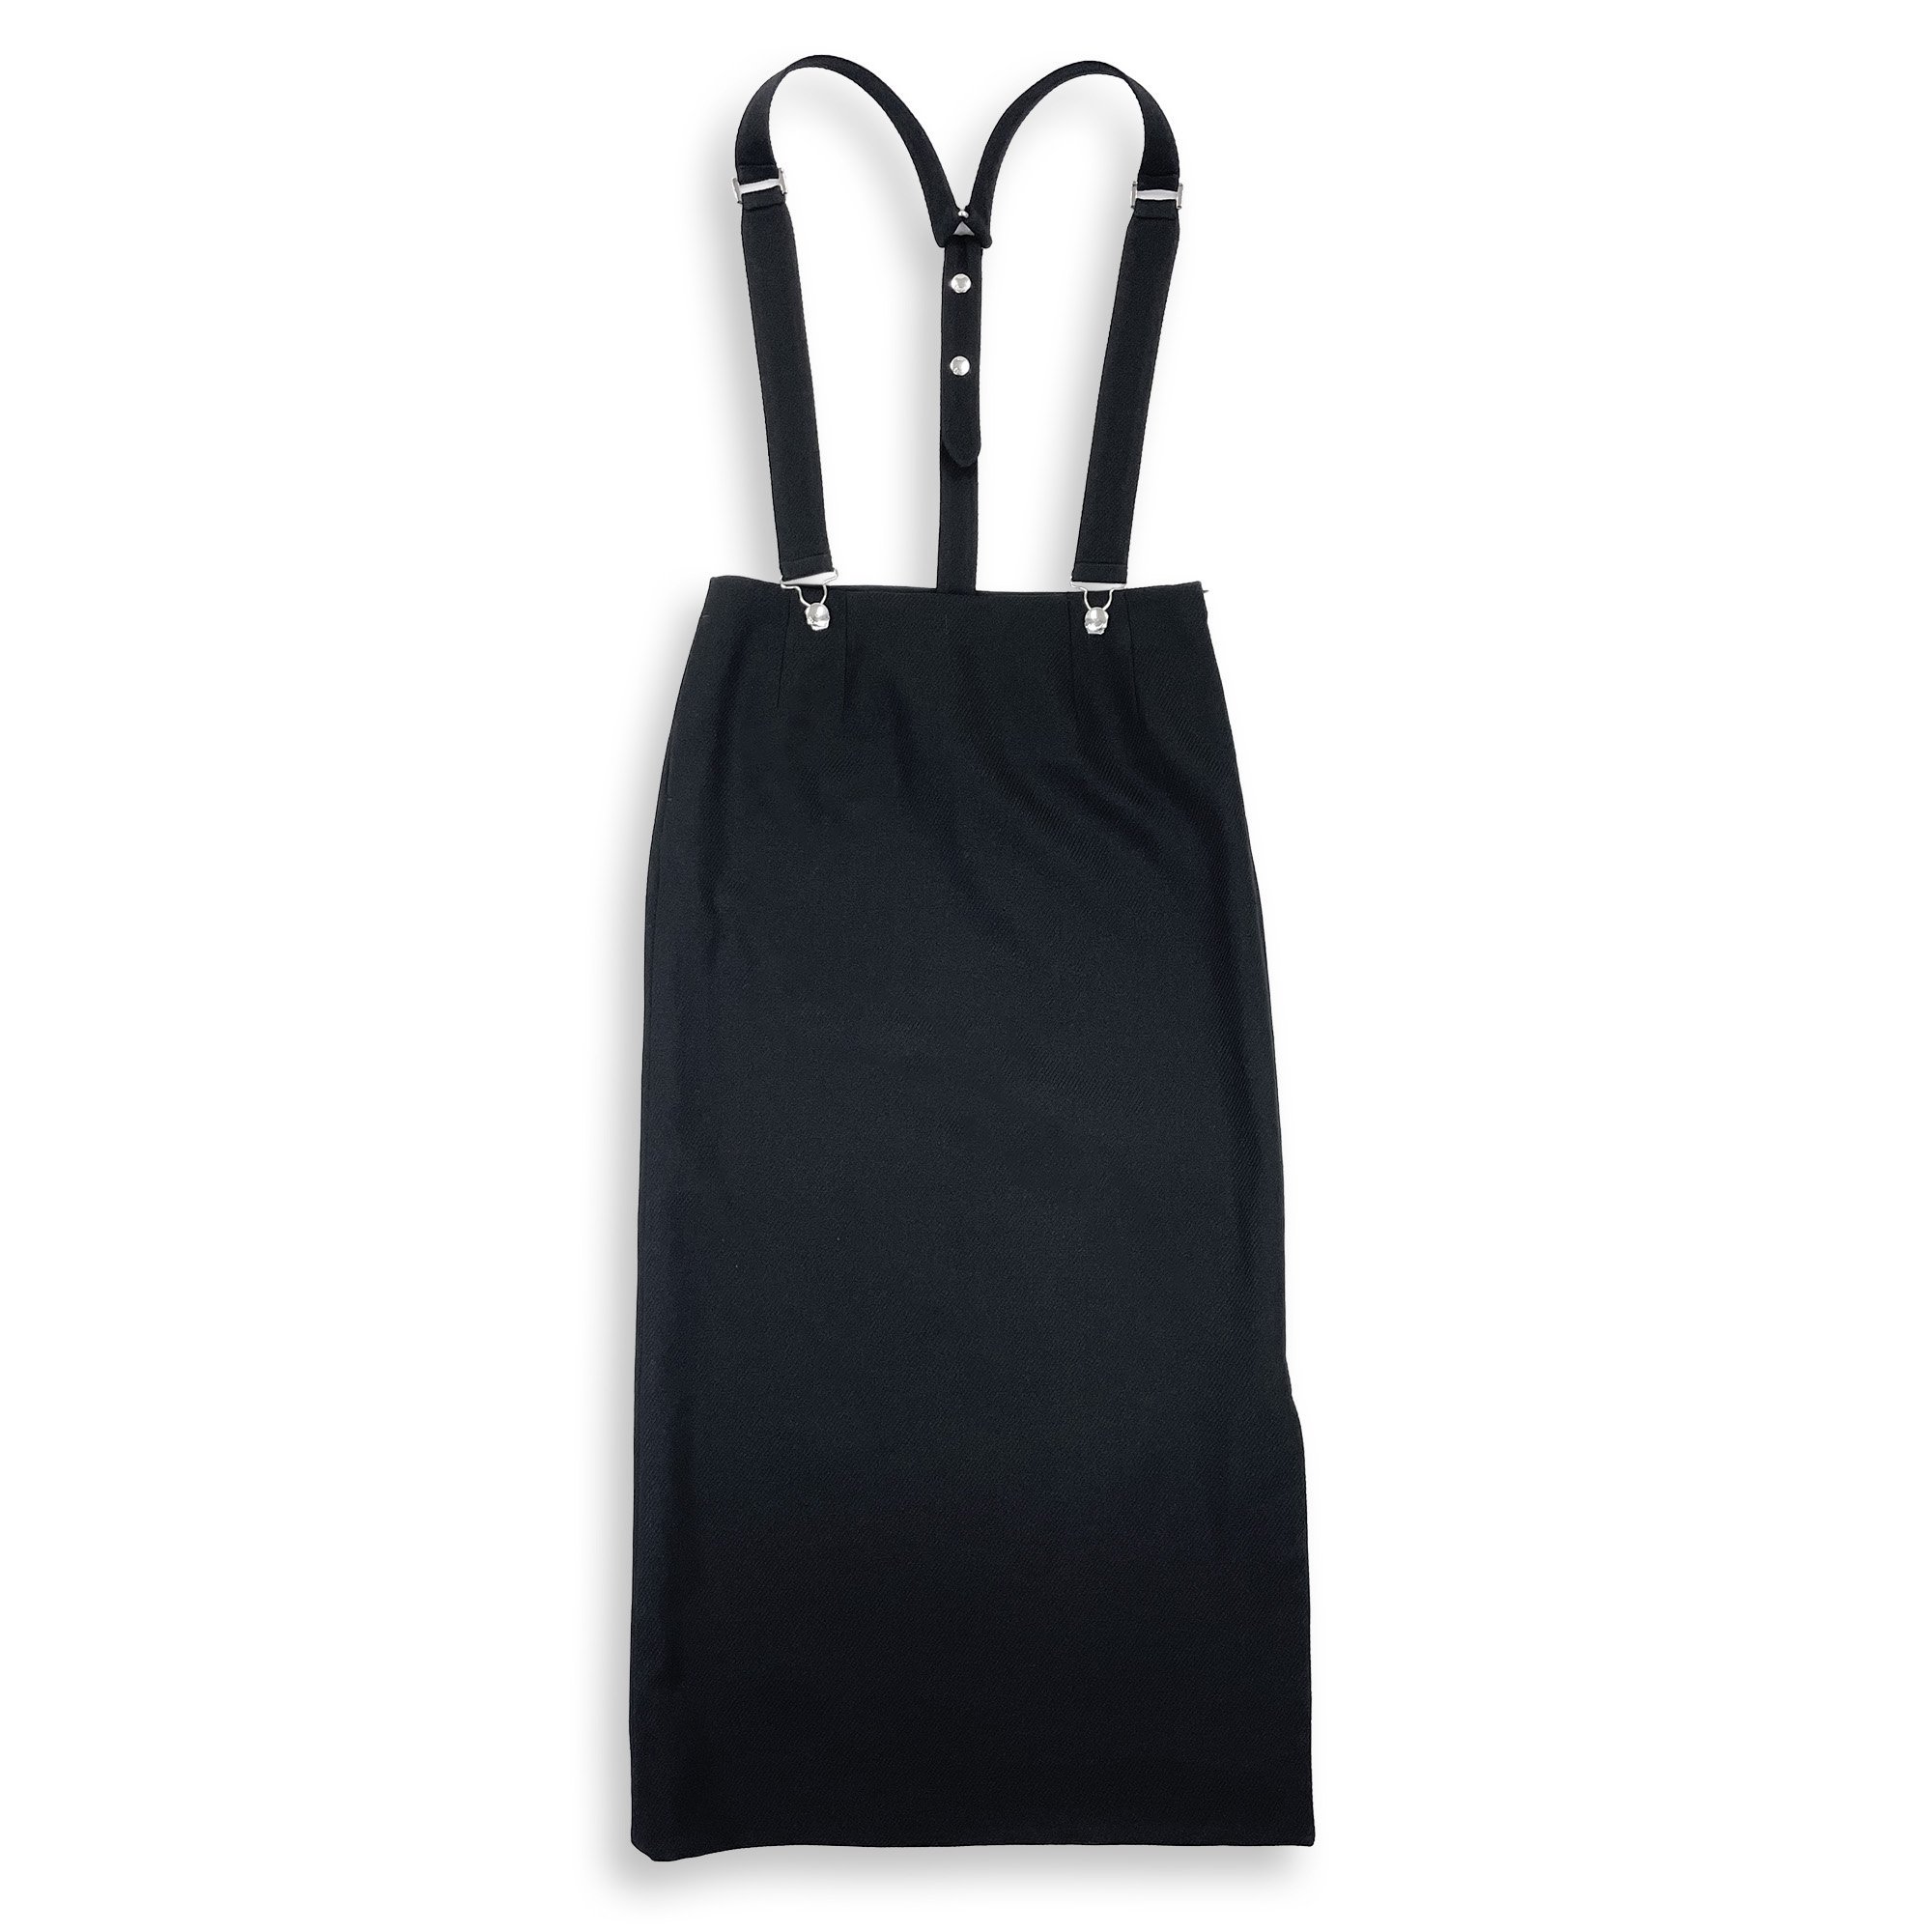 <img class='new_mark_img1' src='https://img.shop-pro.jp/img/new/icons7.gif' style='border:none;display:inline;margin:0px;padding:0px;width:auto;' />THE RERACS CSY KERSEY SUSPENDER PENCIL SKIRT